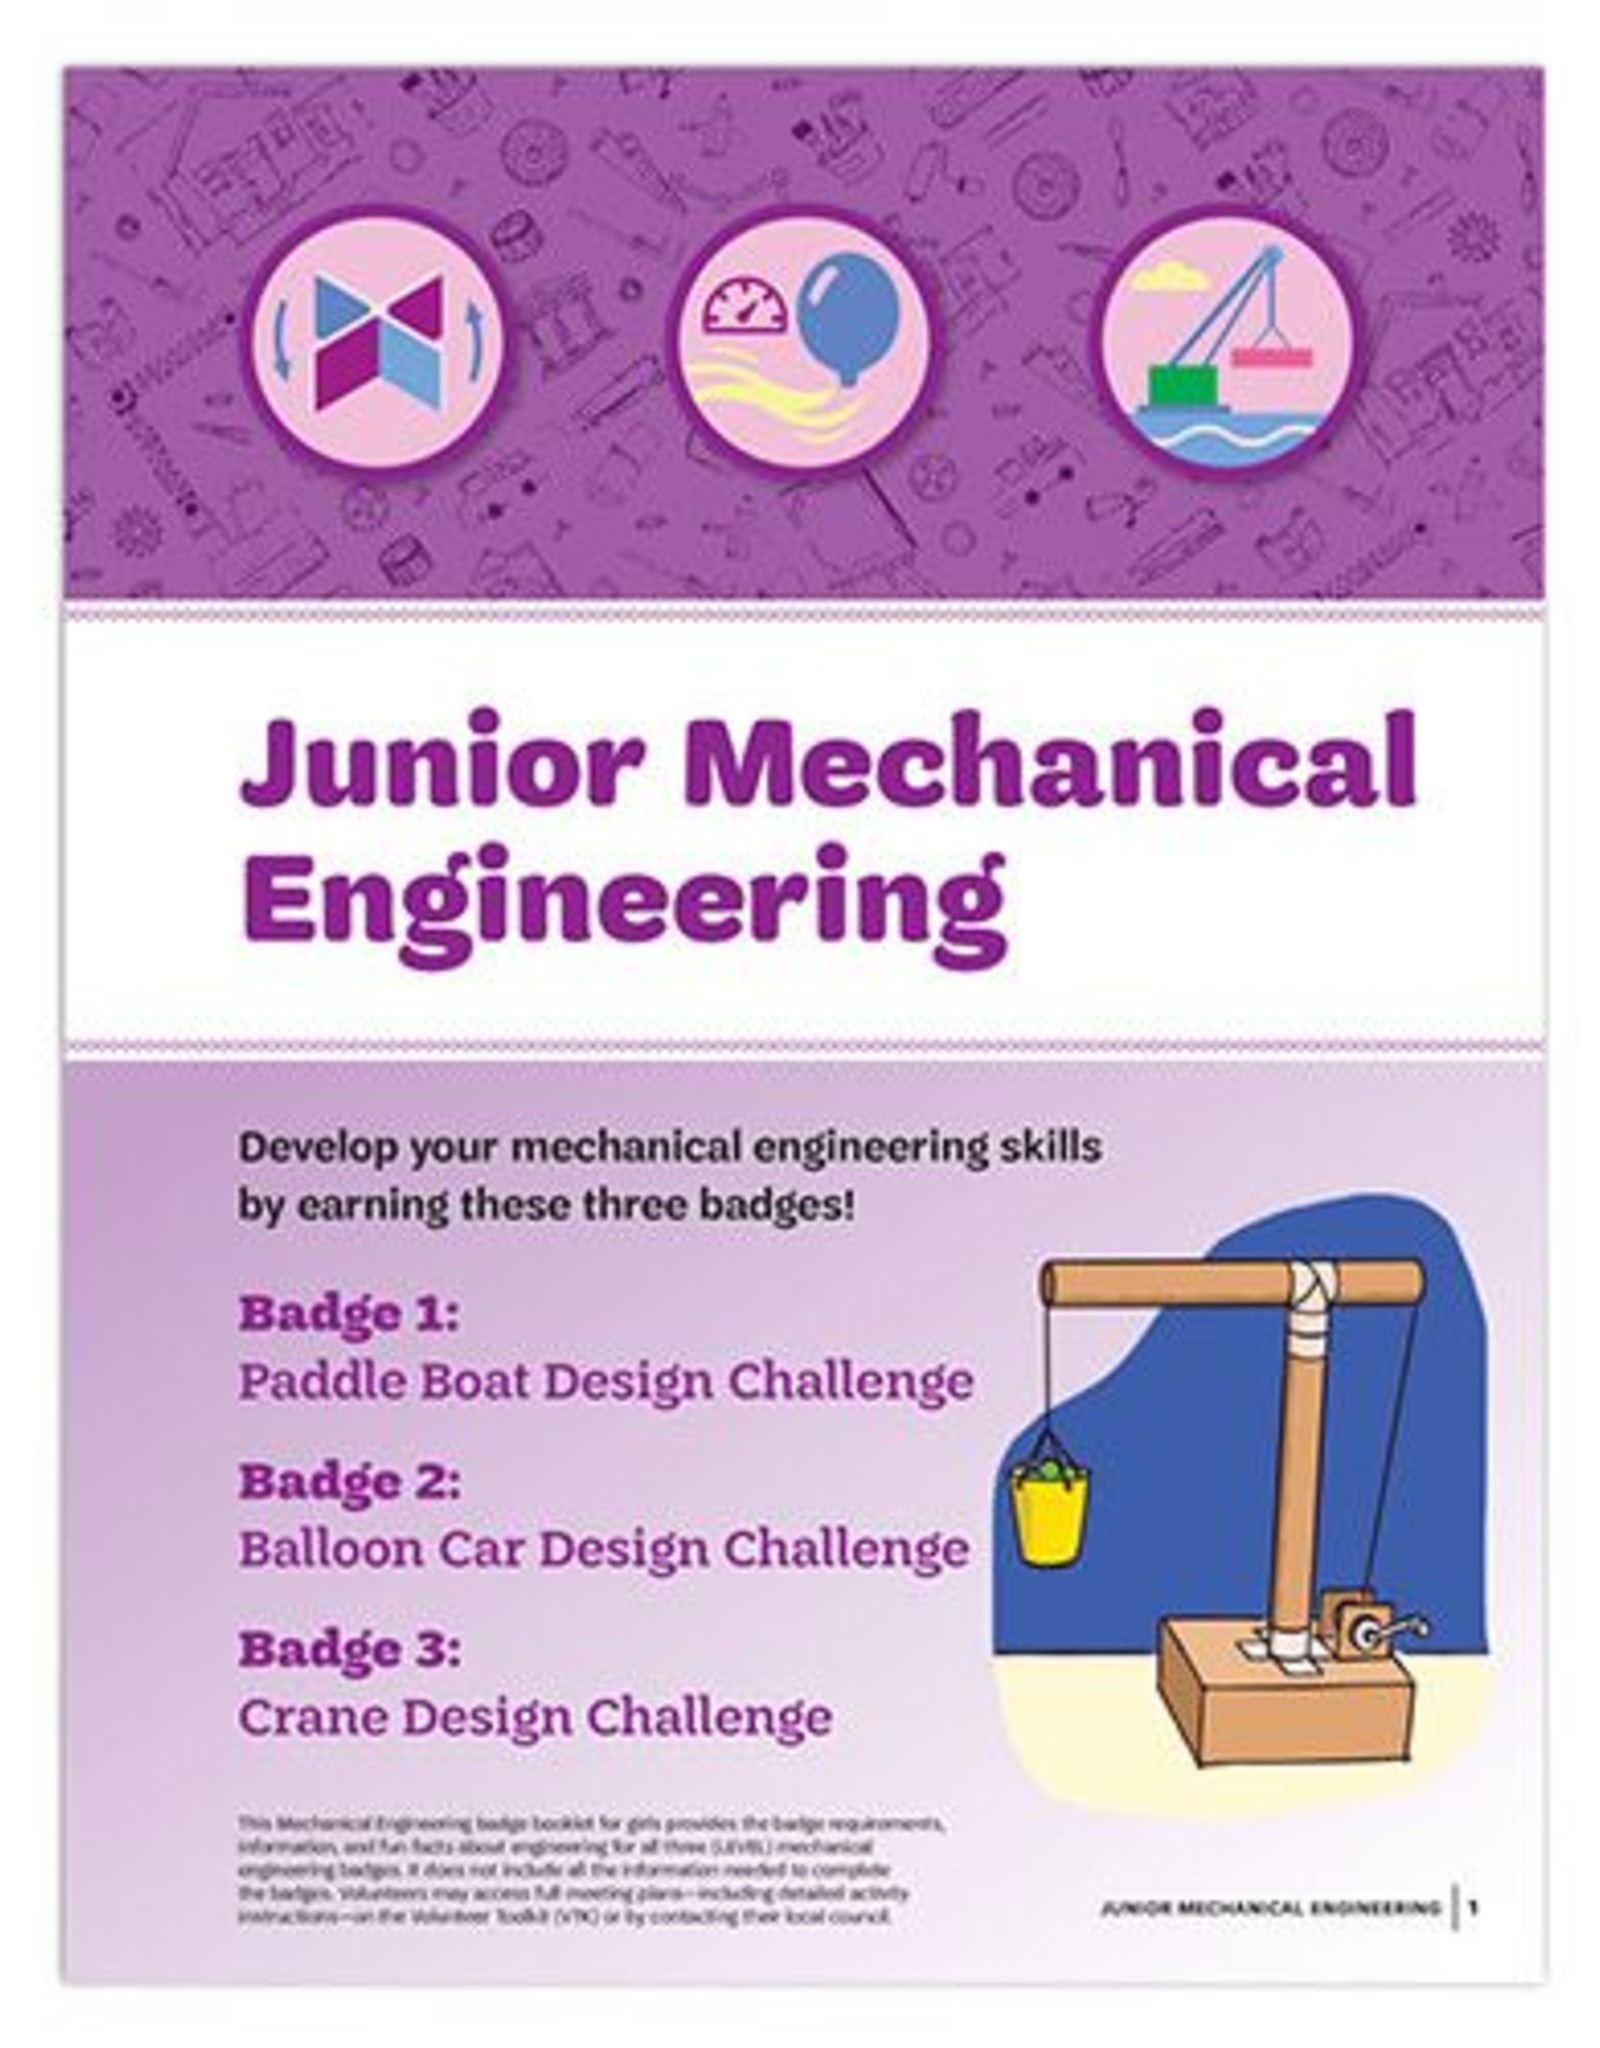 GIRL SCOUTS OF THE USA Junior Mechanical Engineering Requirements